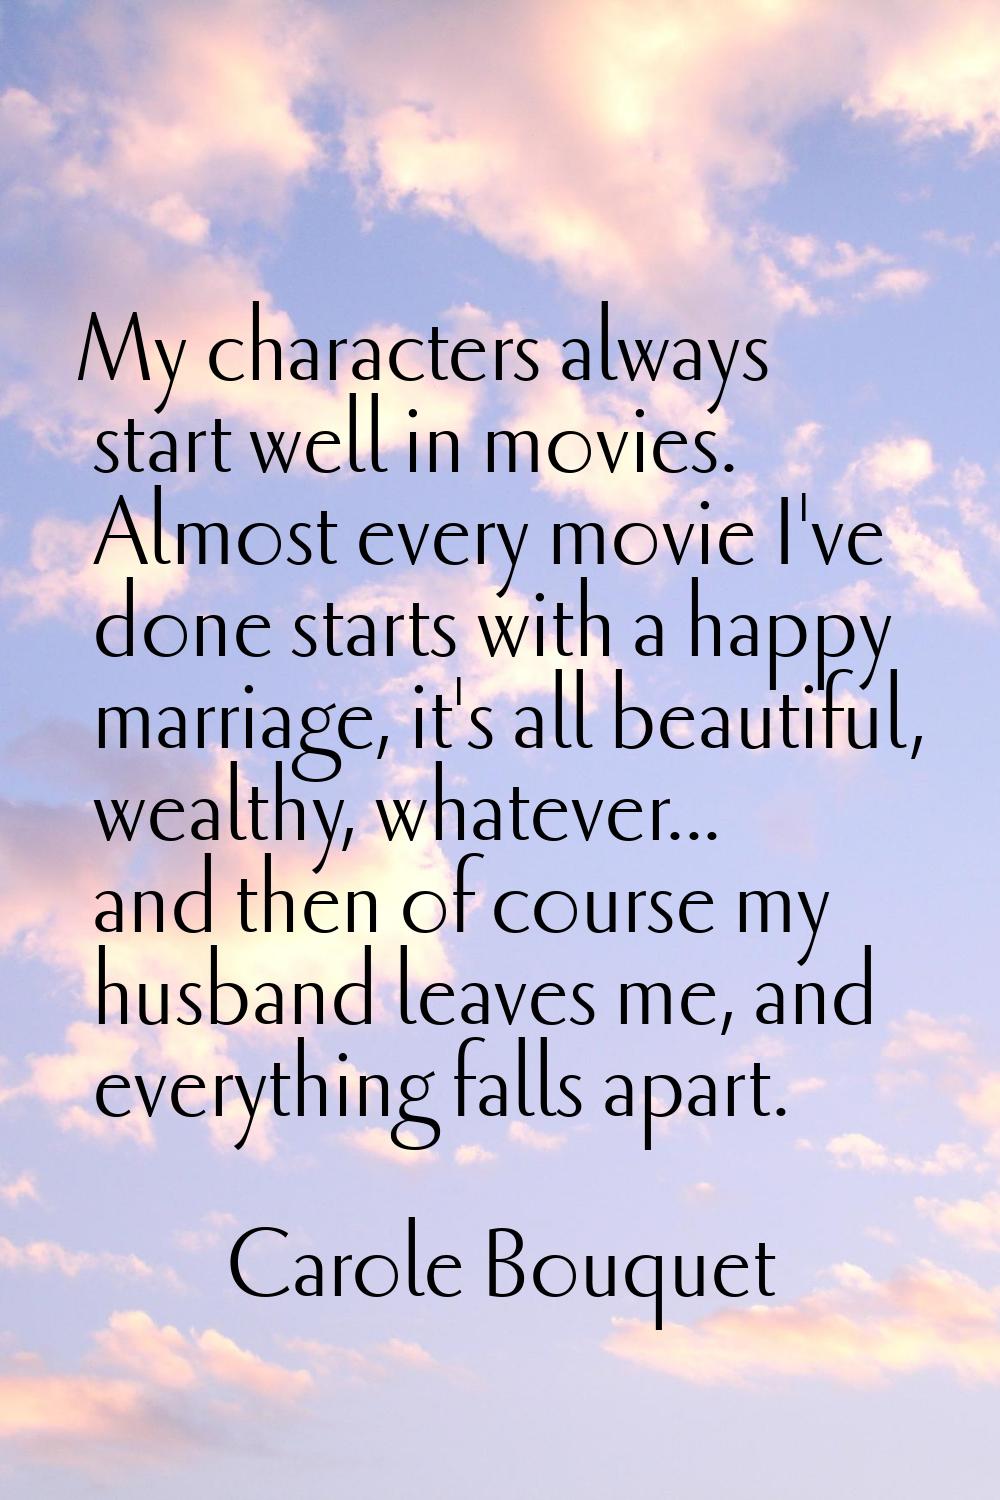 My characters always start well in movies. Almost every movie I've done starts with a happy marriag